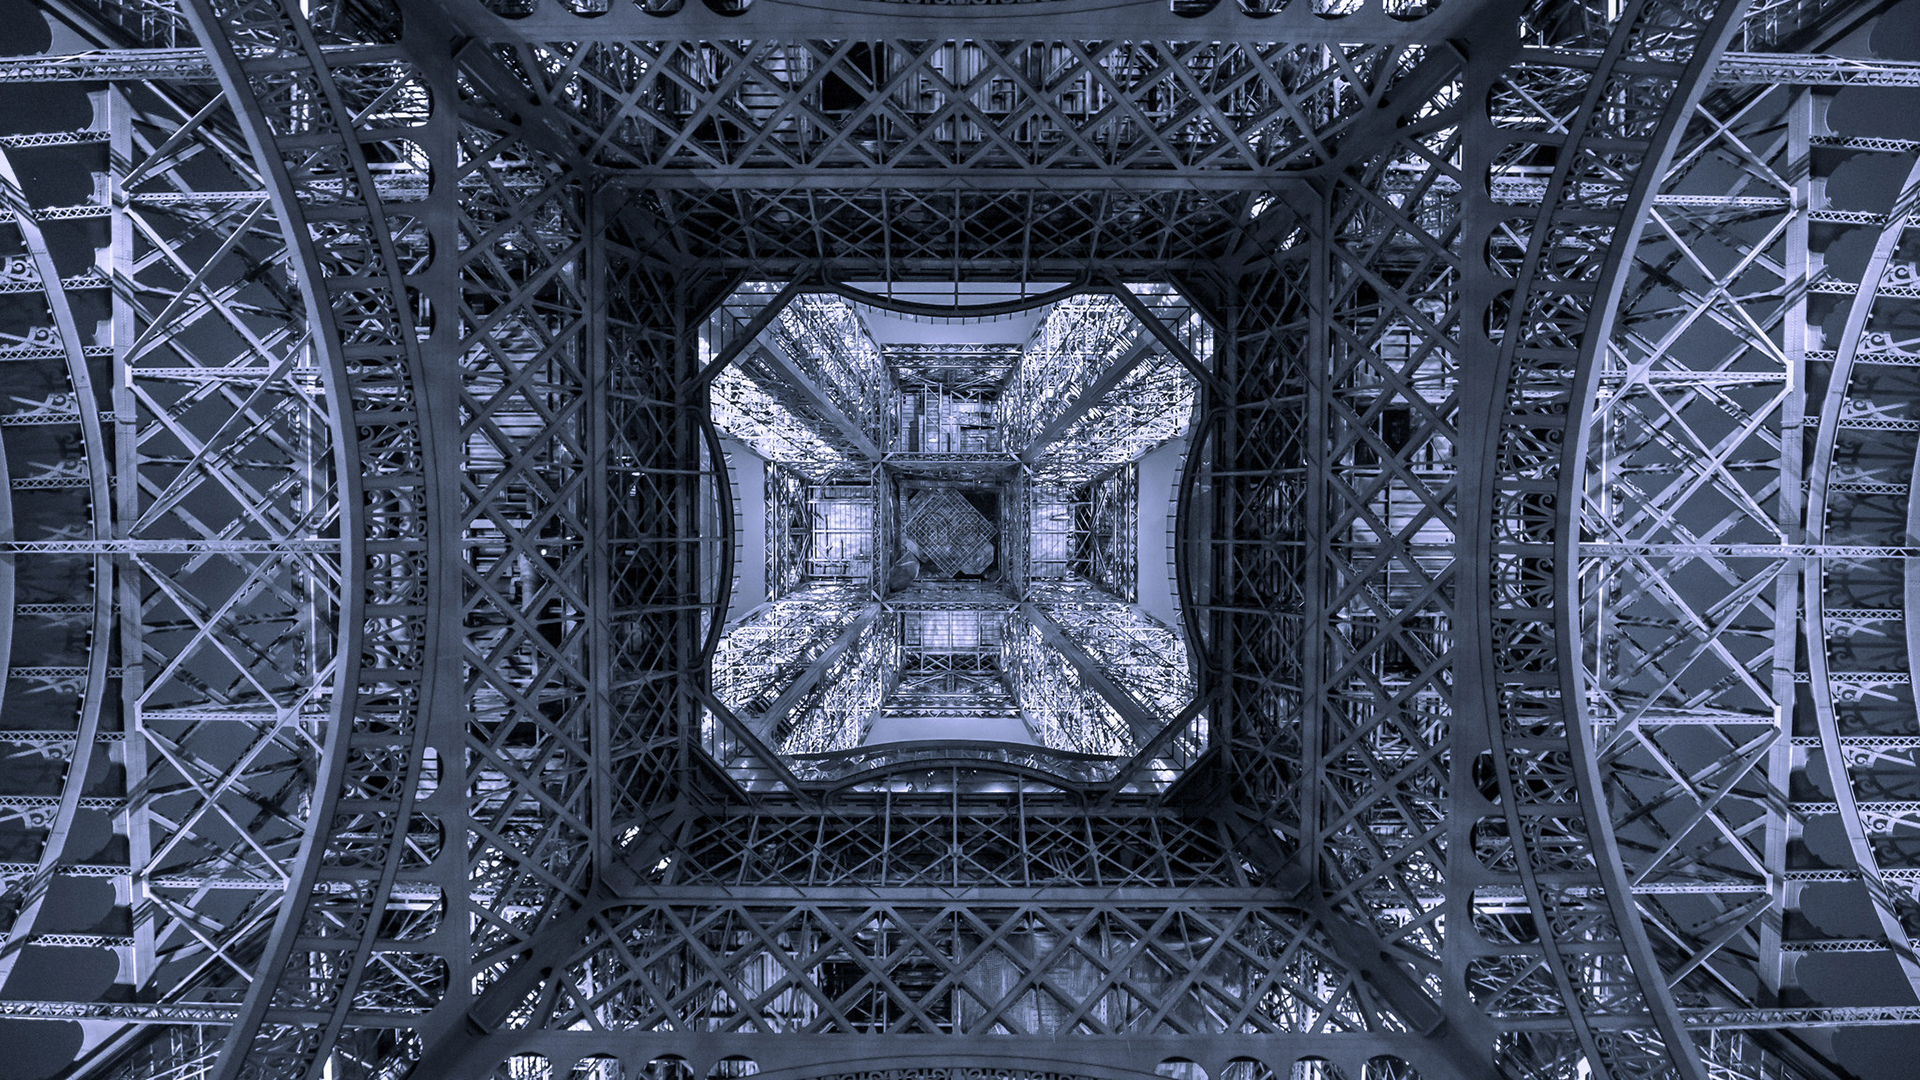 Architecture Tower Eiffel Tower Paris France Worms Eye View Metal Construction Symmetry Gray Bottom  1920x1080